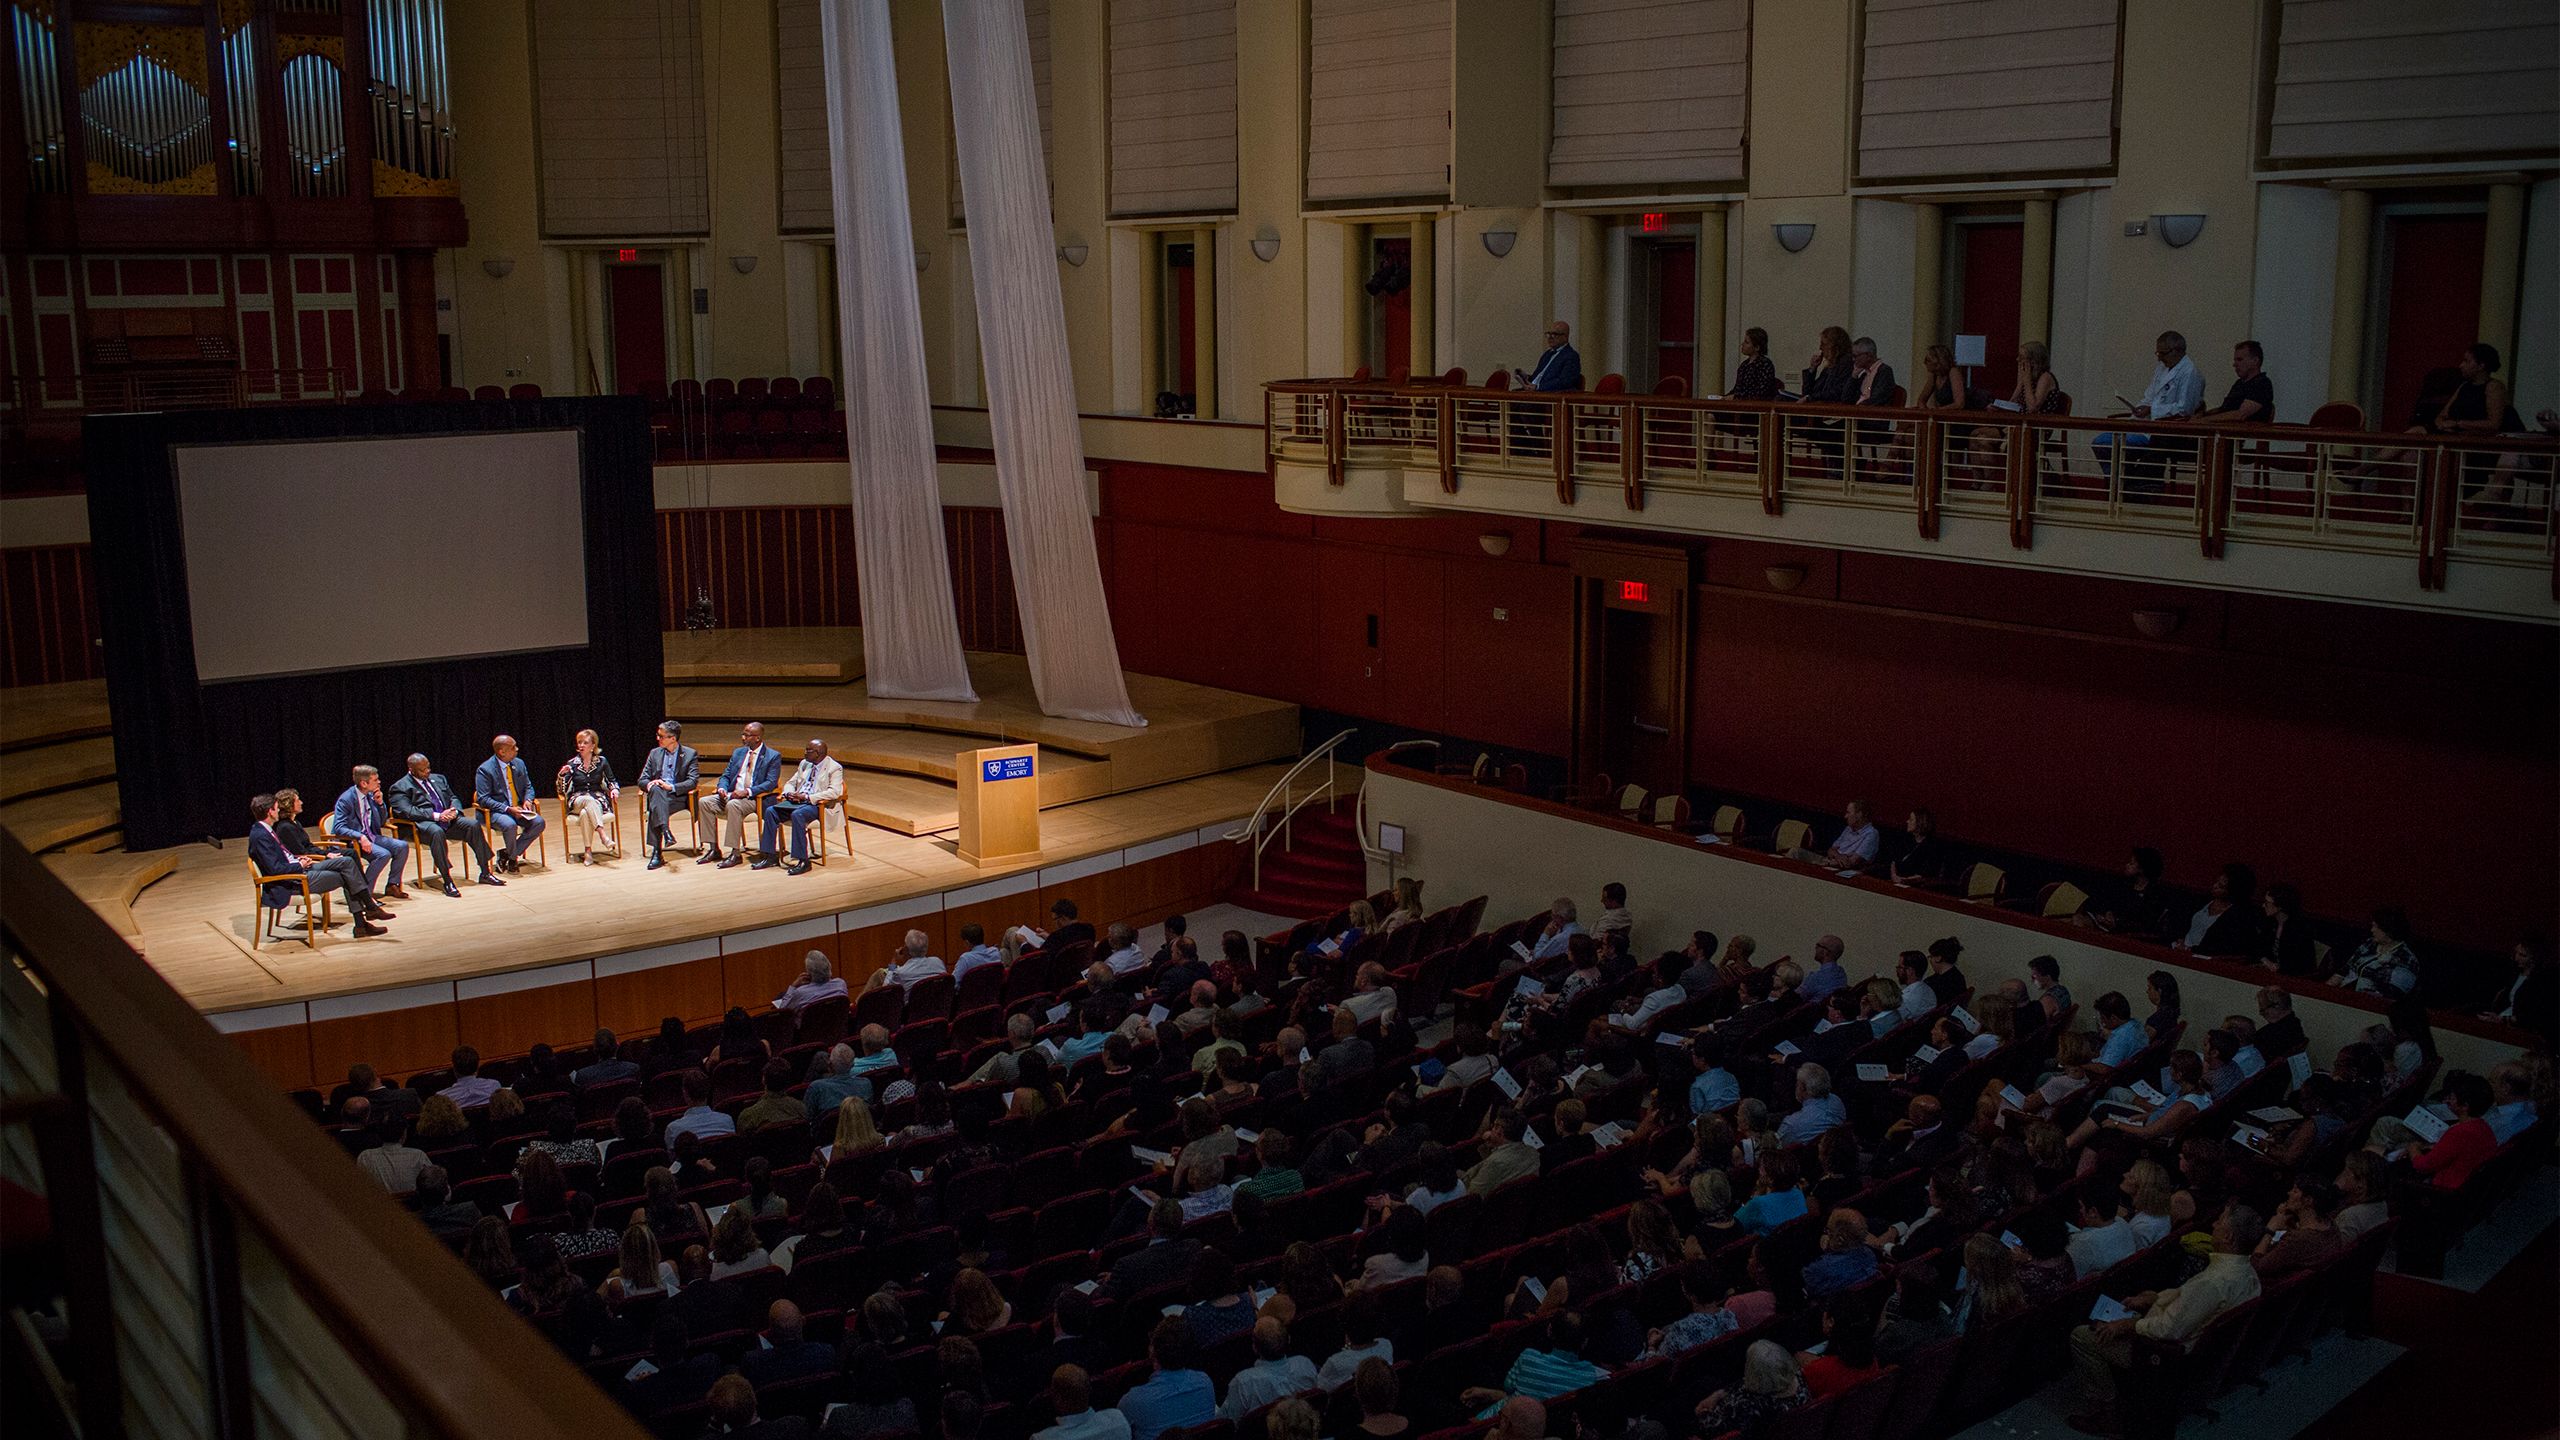 Emory's Schwartz Center for Performing Arts is filled to capcity as a panel of faculty sit on stage.